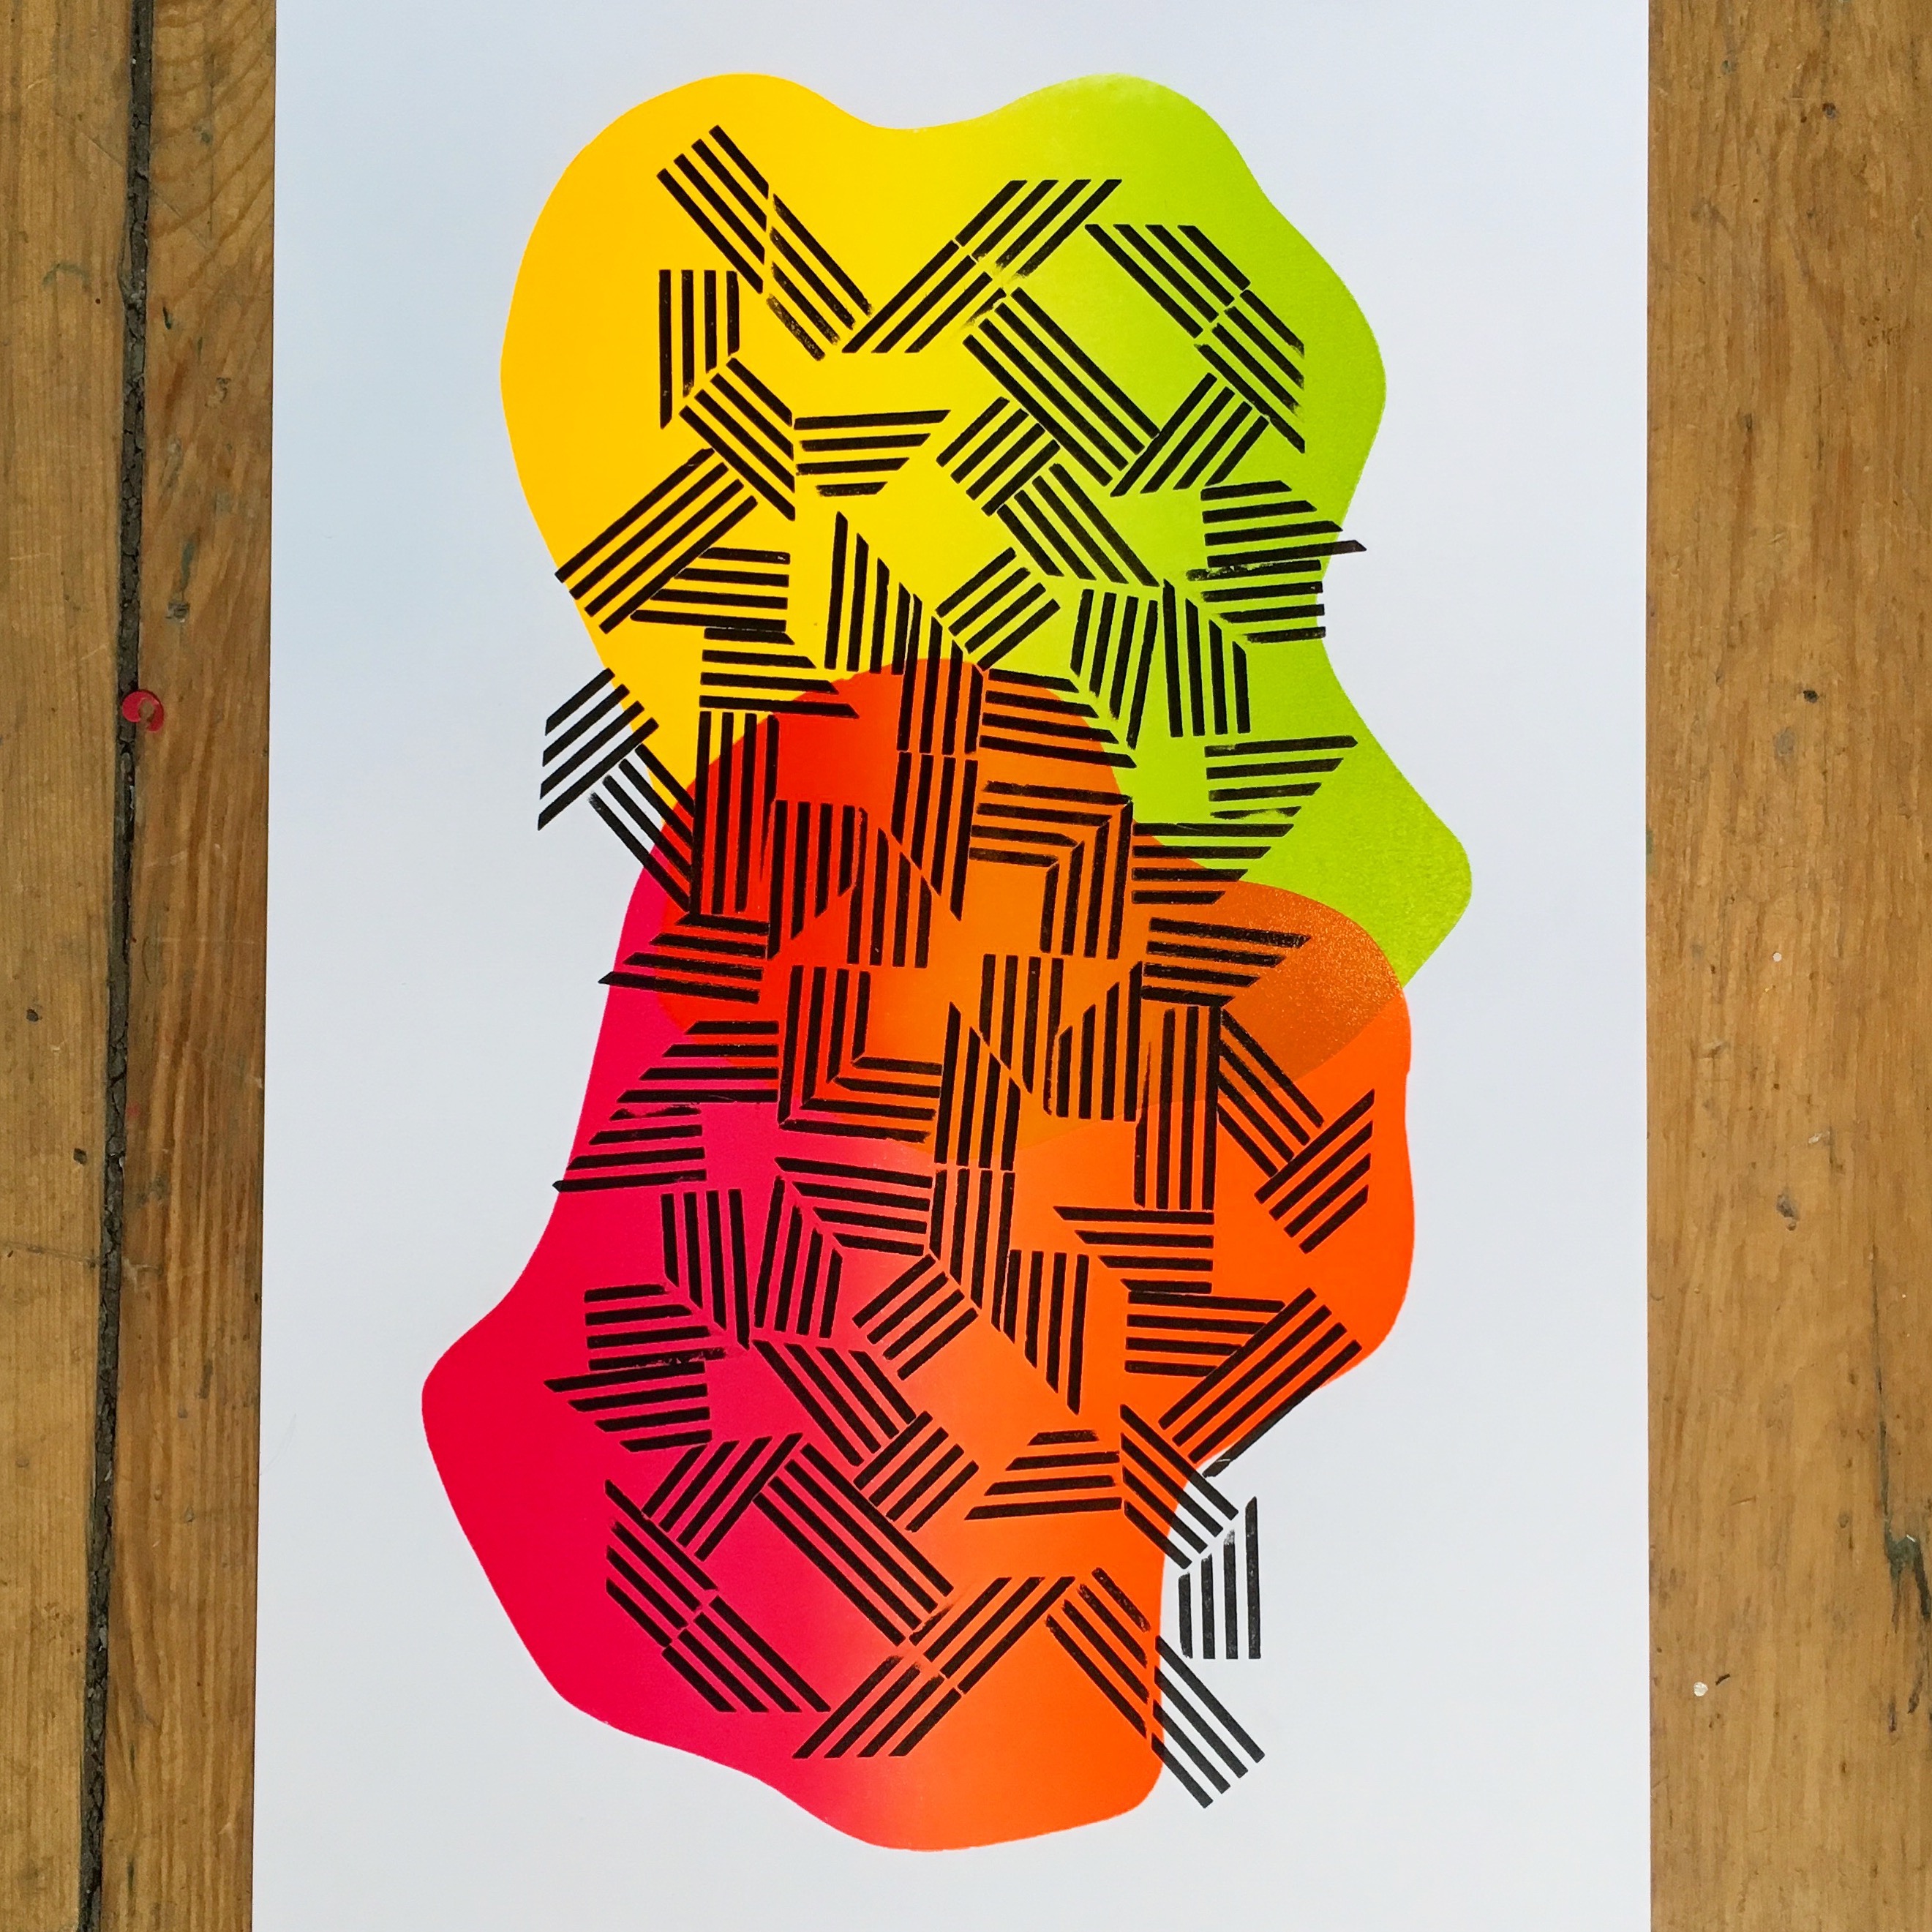 A print featuring day-glo shapes with geometric black overlay